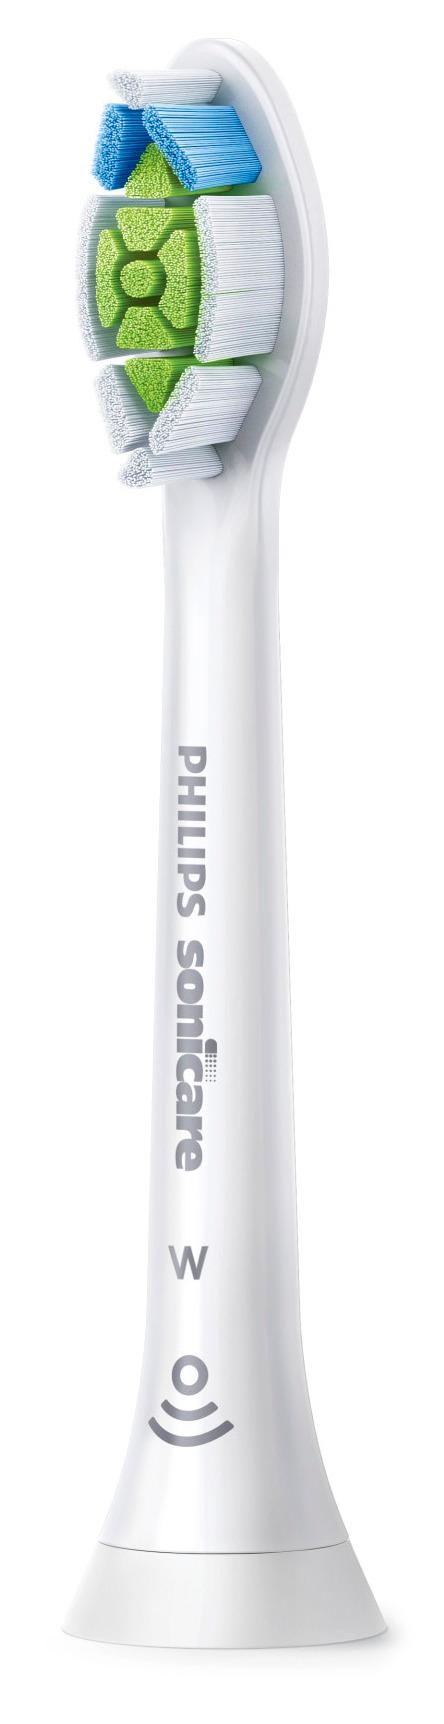 Left View: Philips Sonicare - DiamondClean Replacement Toothbrush Heads (4-pack) - White